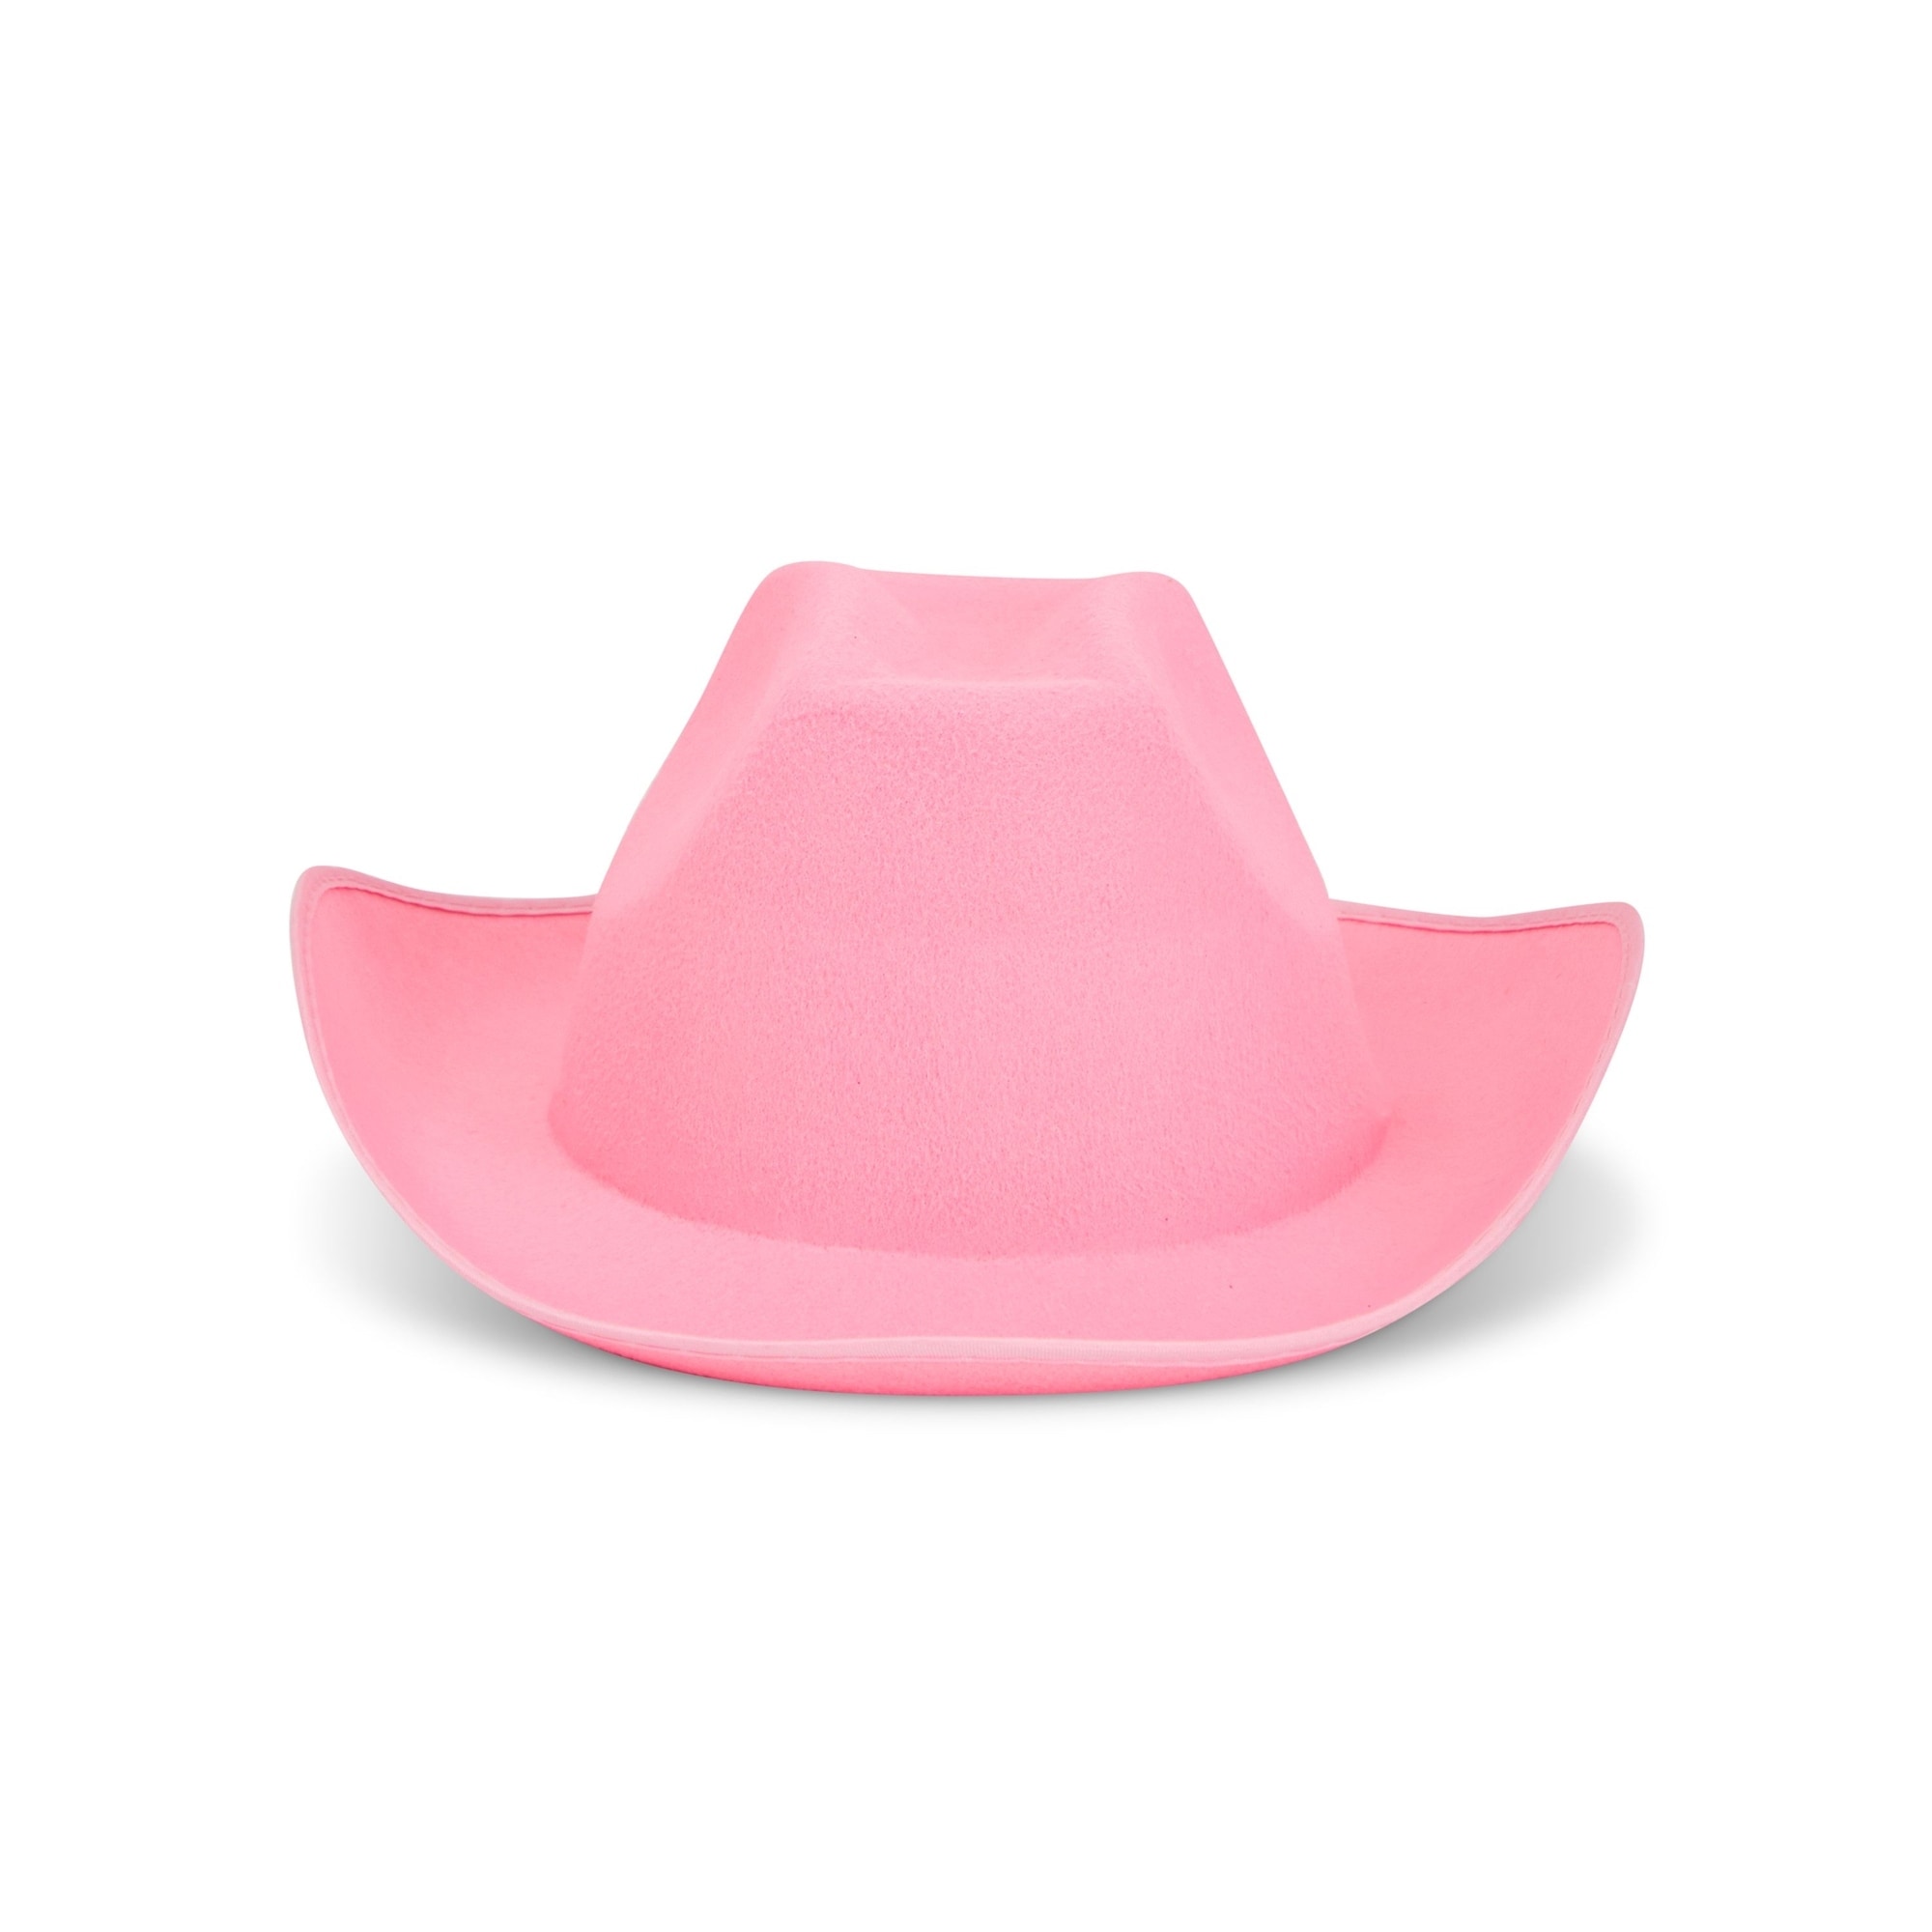 Licupiee Felt Cowboy Hat for Women Teen Girls Pink Cowgirl Hats with Fluffy  Feathers Chin Strap for Halloween Party 